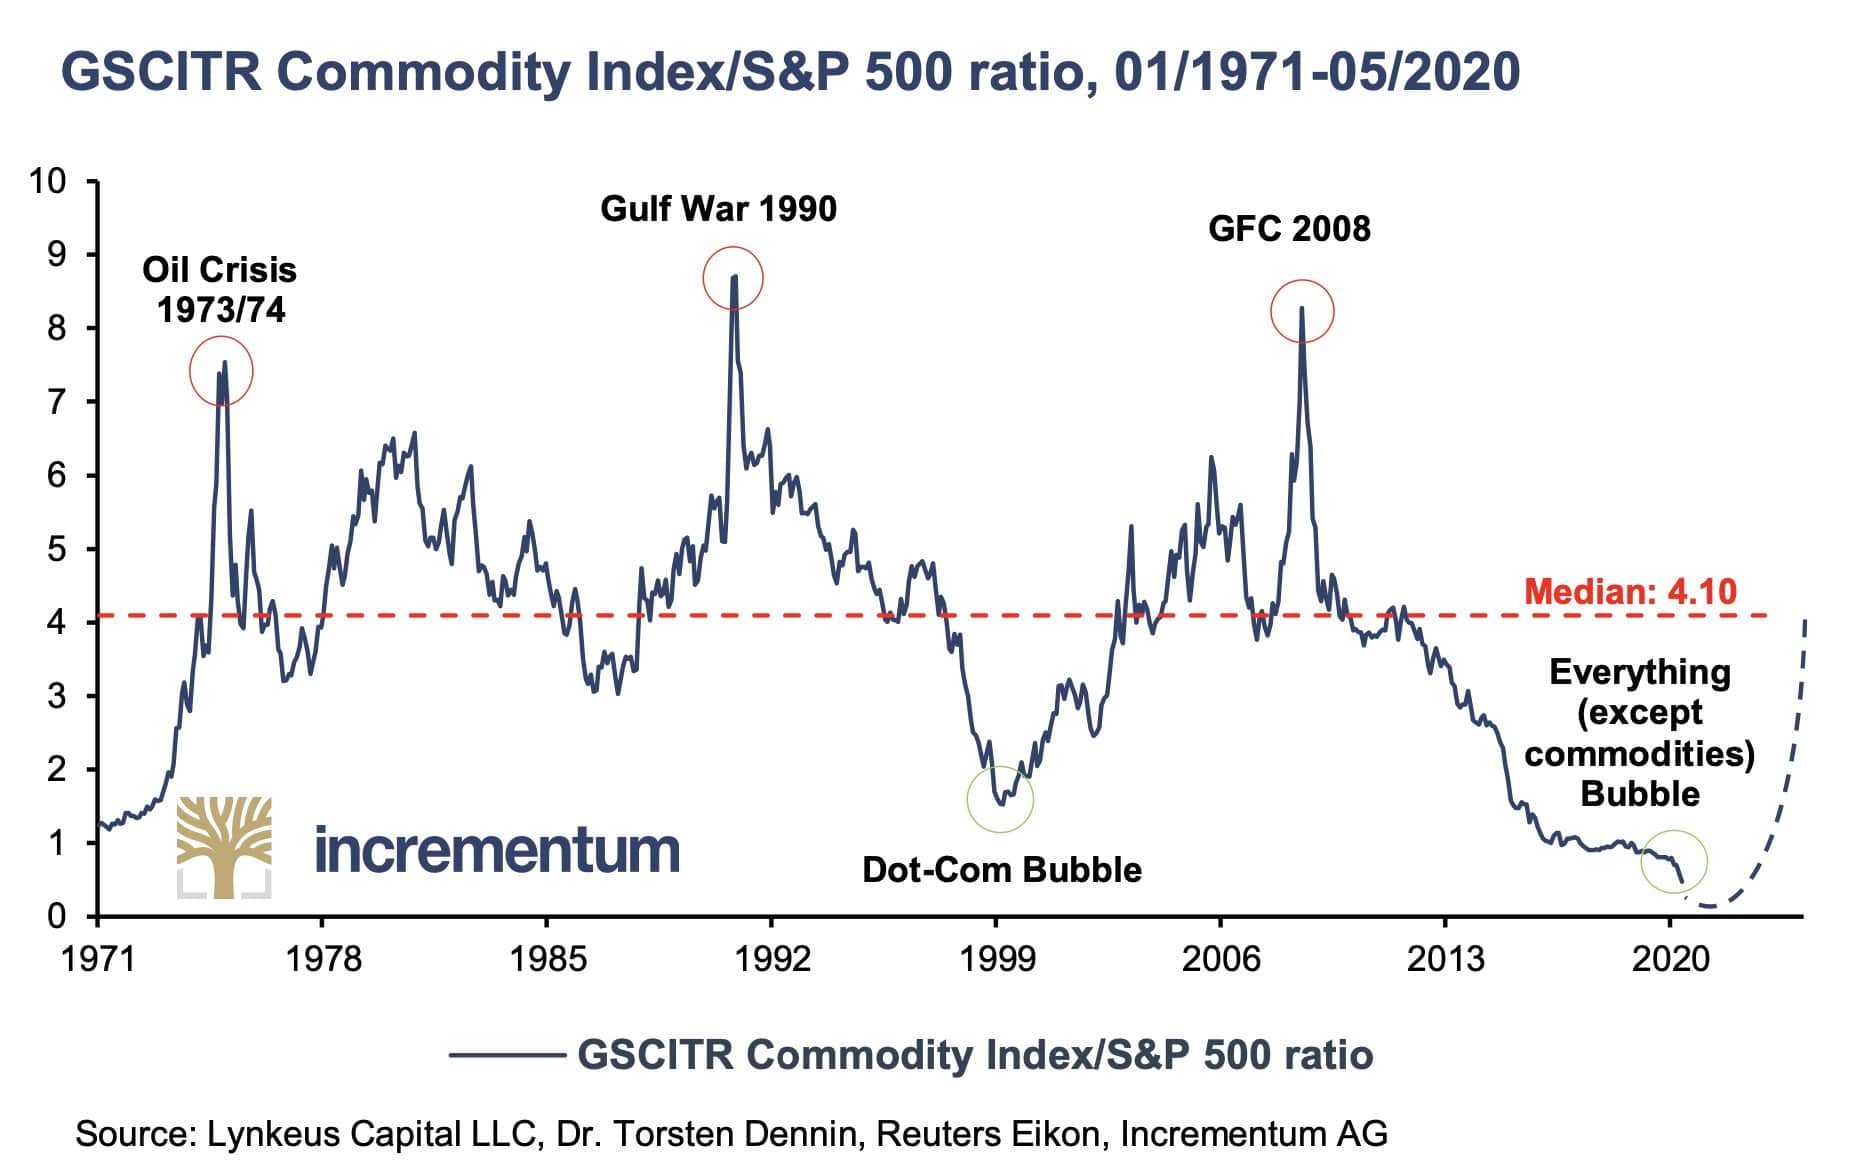 Commodities are at their lowest point in 50 years compared to the S and P 500 index, which means commodities are in a supercycle bull run.